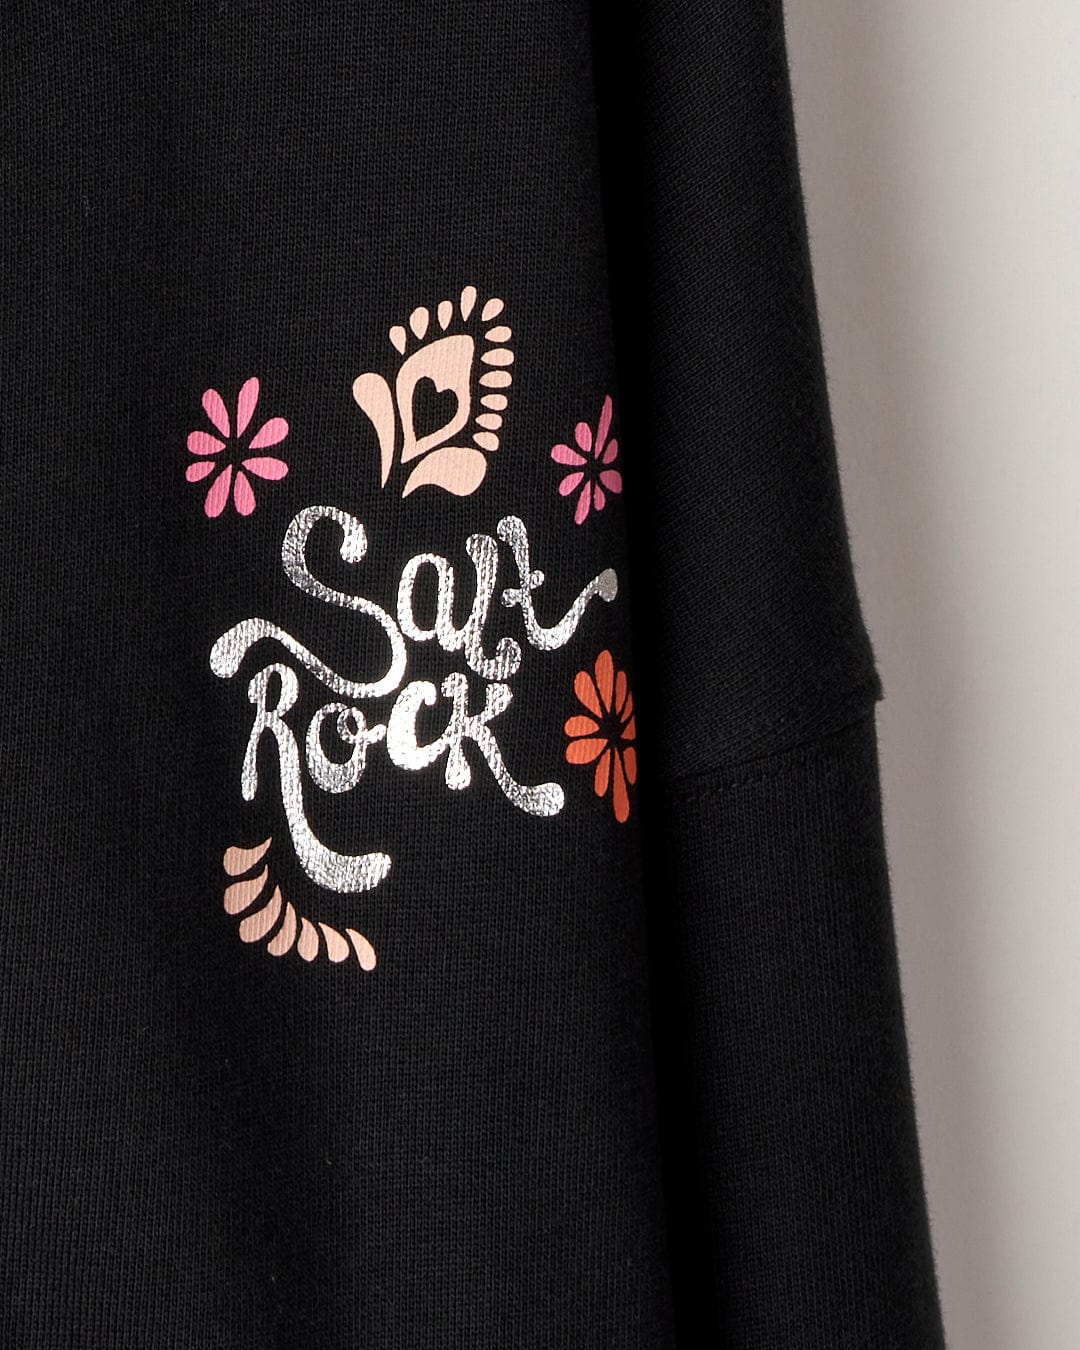 Close-up of a Tahiti Van Kids Zip Hoodie in Washed Black by Saltrock with a glittery silver "sax rock" text and graphic design including a saxophone, pink and orange flowers.